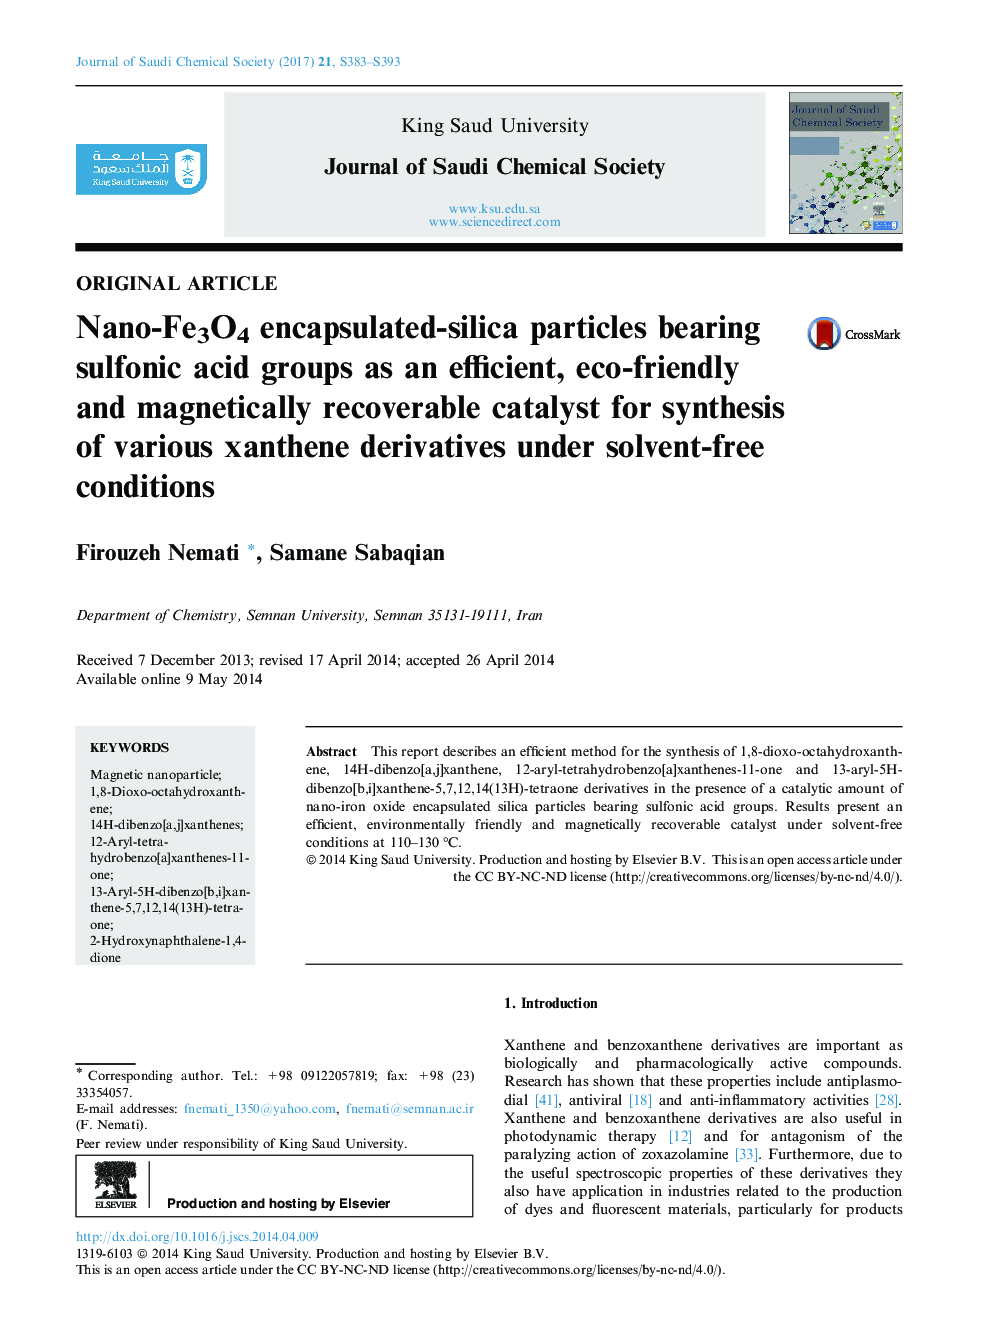 Nano-Fe3O4 encapsulated-silica particles bearing sulfonic acid groups as an efficient, eco-friendly and magnetically recoverable catalyst for synthesis of various xanthene derivatives under solvent-free conditions